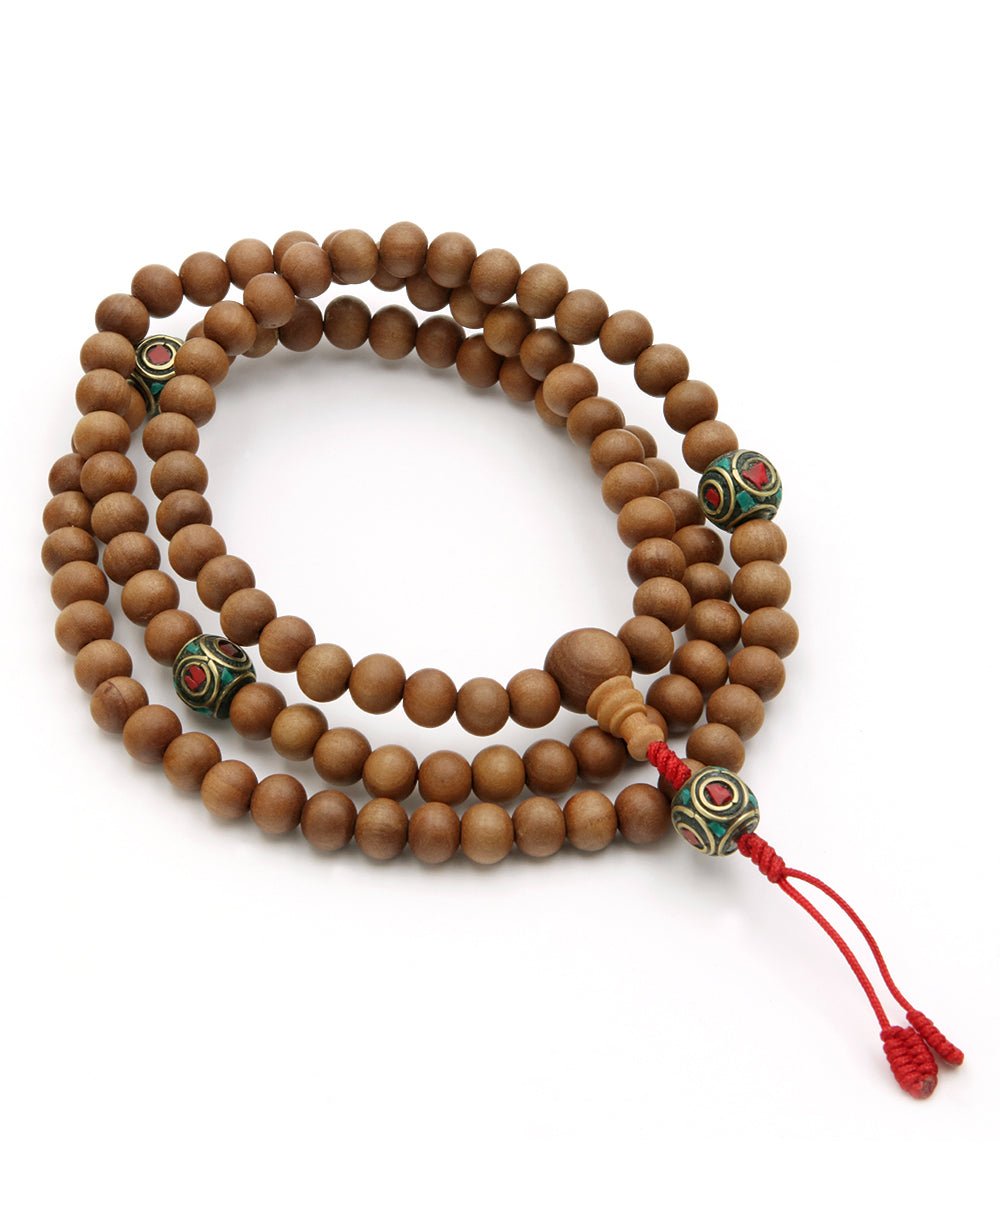 Wooden Meditation Mala with Inlay Counters, 108 Beads -